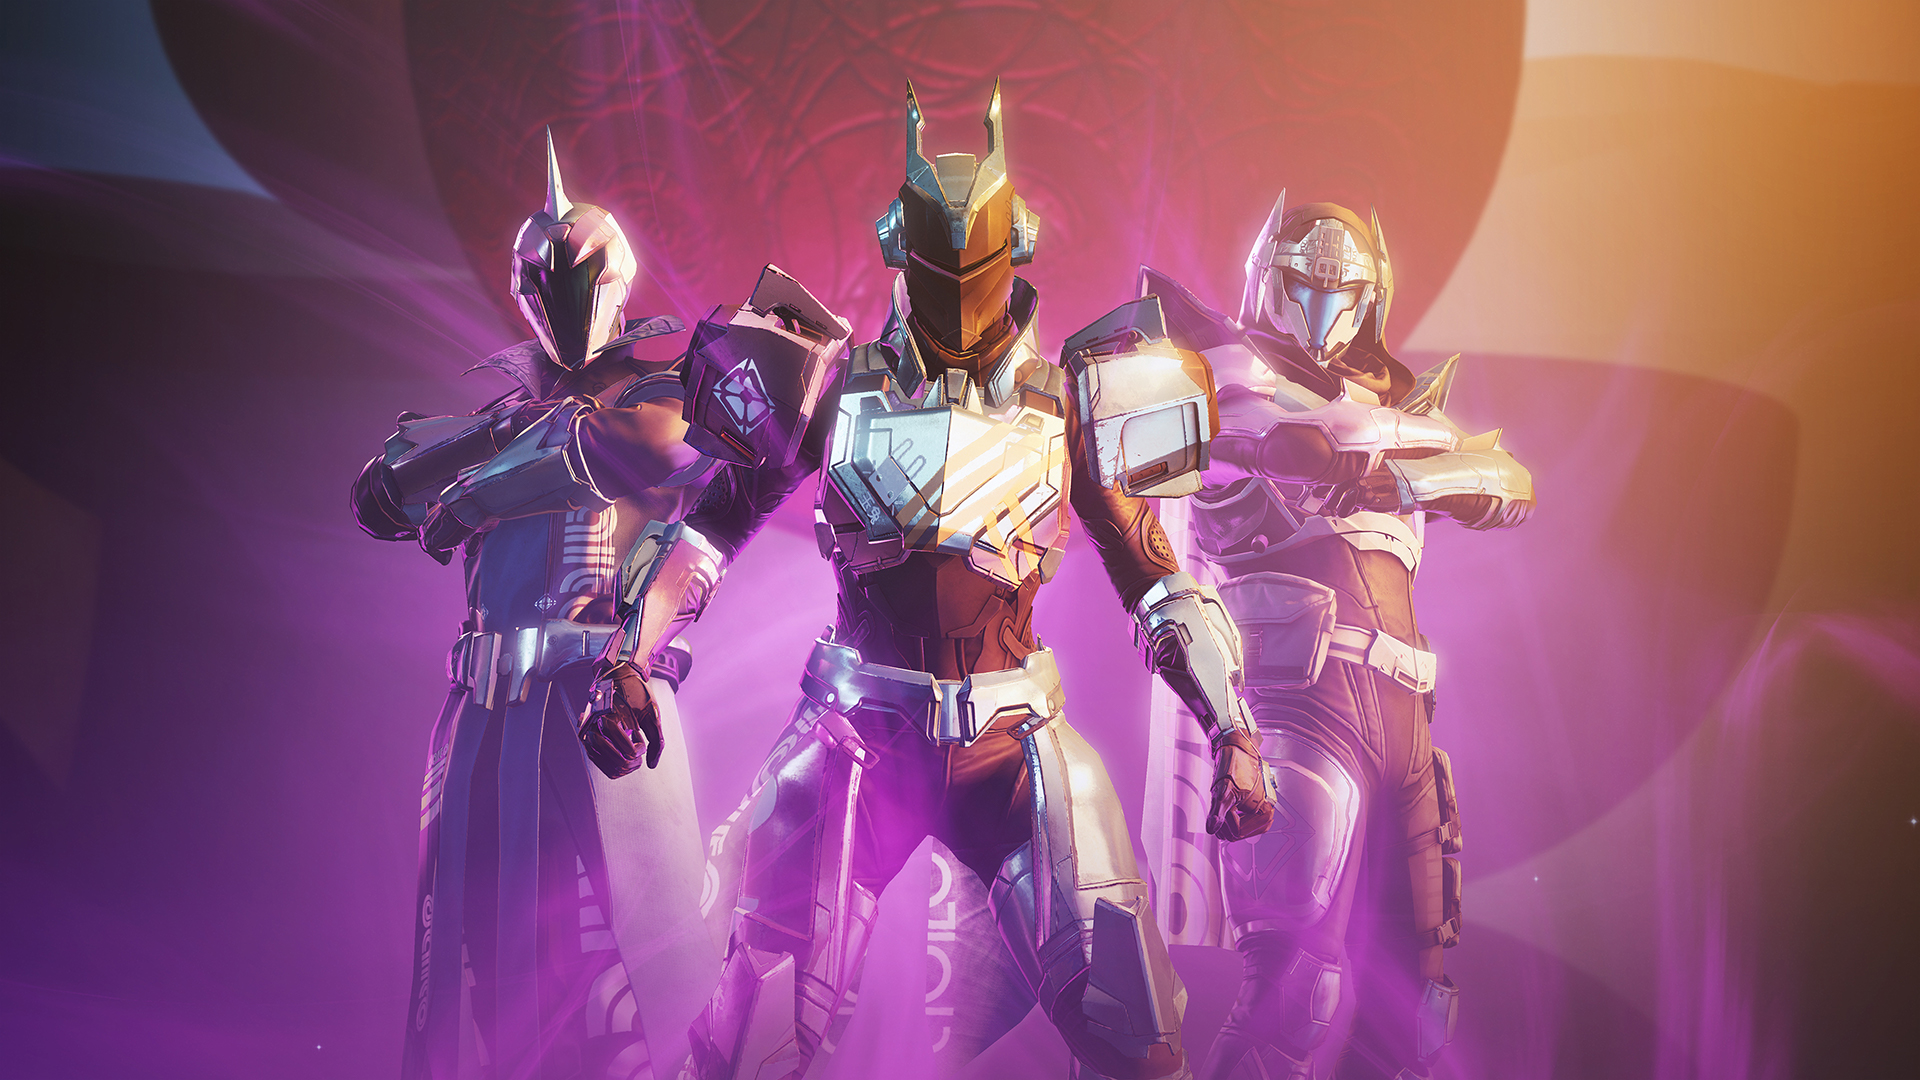  Destiny 2 Moments of Triumph 2020: What we know so far 